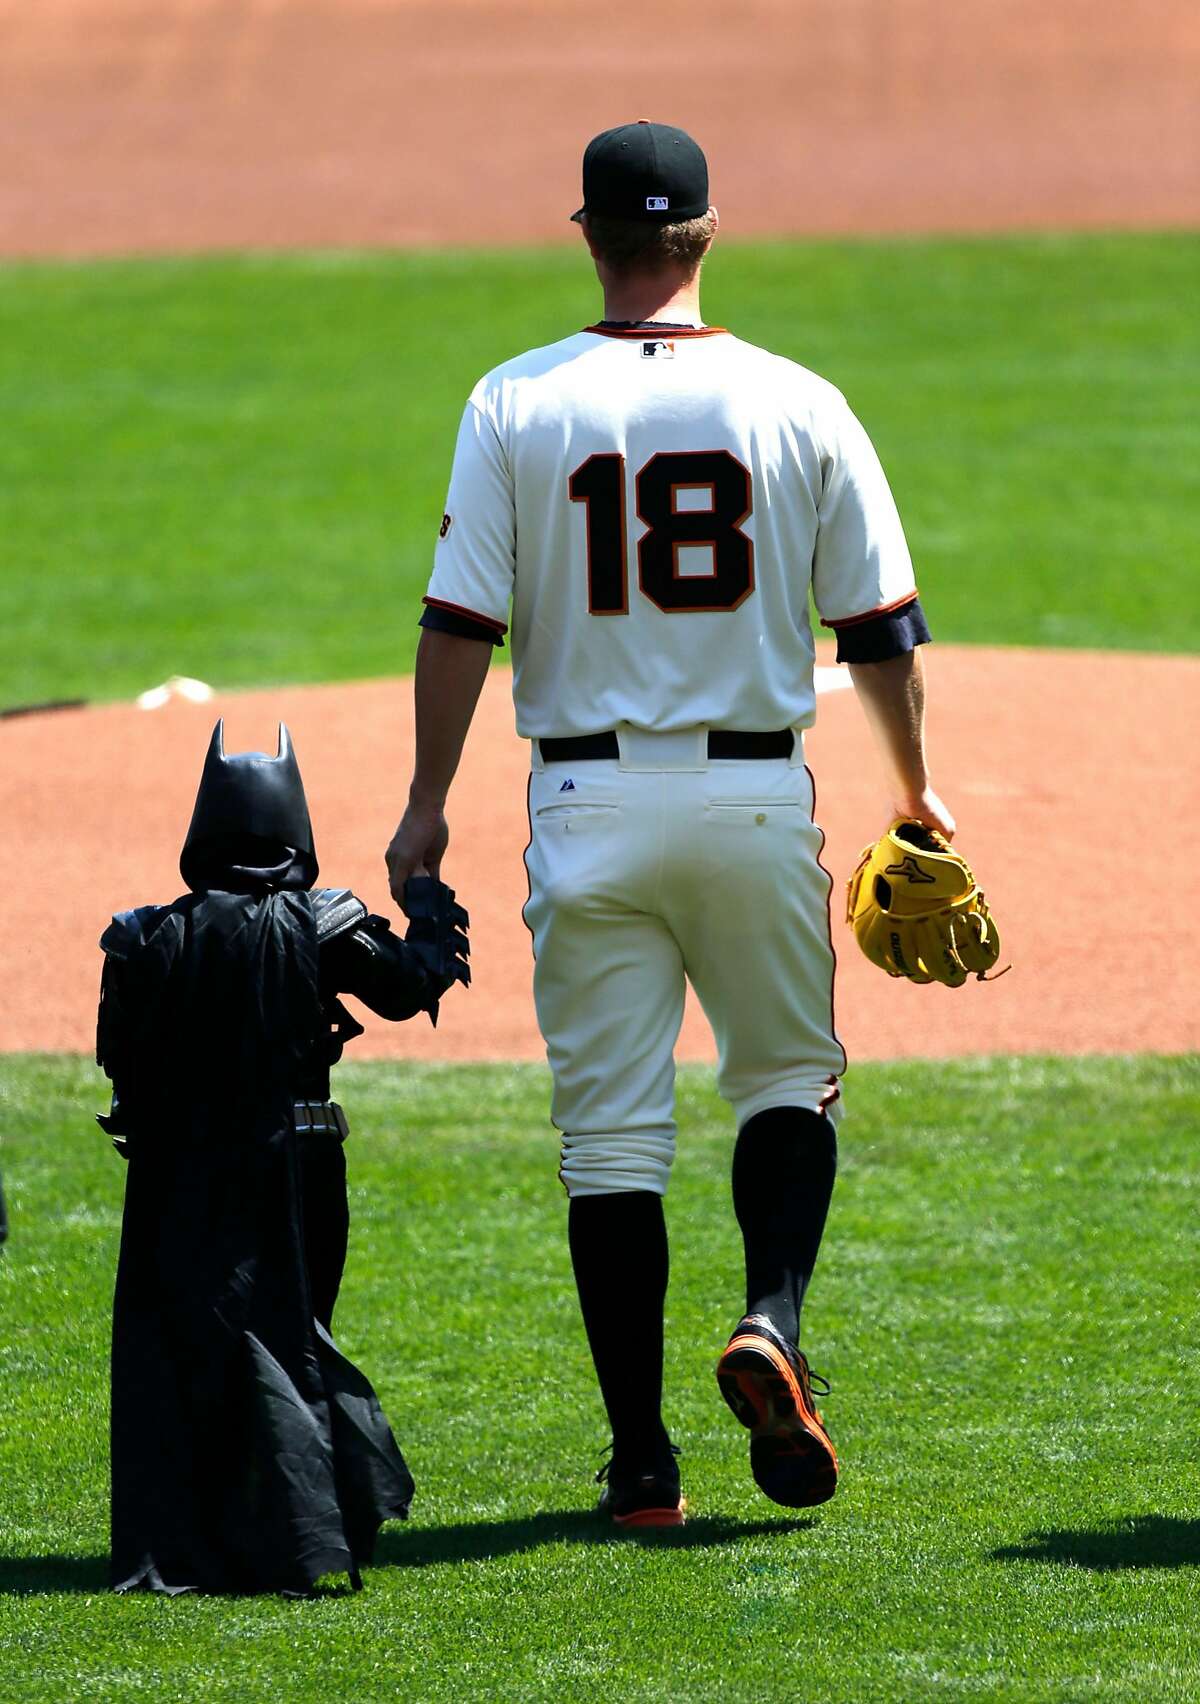 Giants' pitcher Matt Cain leads "Bat kid" out to the mound to throw the first pitch during opening ceremonies as the San Francisco Giants prepare to take on the Arizona Diamondback during their home opener at AT&T Park on Tuesday April 8, 2014, in San Francisco, Calif.